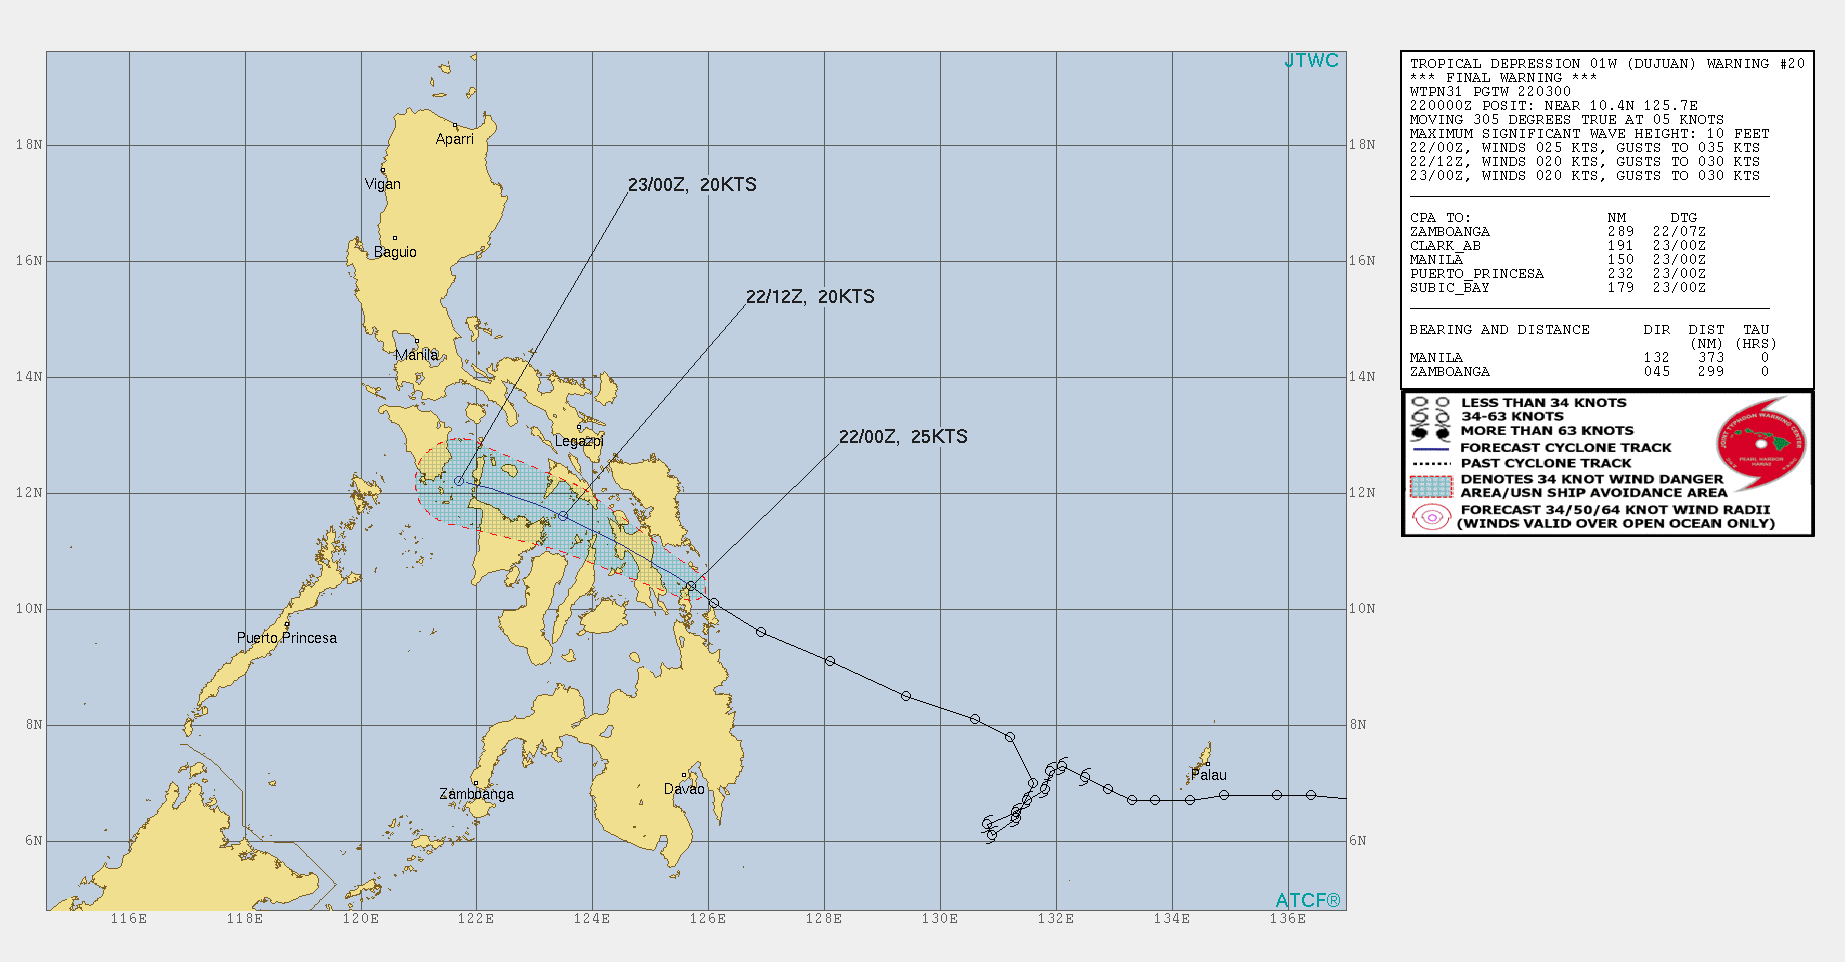 01W(DUJUAN). WARNING 20 ISSUED AT 22/03UTC.TD 01W IS TRACKING NORTHWESTARD ALONG THE SOUTHERN  PERIPHERY OF AN EXTENSIVE SUBTROPICAL RIDGE TO THE NORTH. THE SYSTEM  WILL CONTINUE TO TRACK NORTHWESTWARD TO WESTWARD OVER THE CENTRAL  PHILIPPINE ISLANDS AND STEADILY DISSIPATE OVER THE NEXT 12 TO 24  HOURS AS VERTICAL WIND SHEAR INCREASES, ALONG-TRACK SEA SURFACE  TEMPERATURE DECREASES AND THE CIRCULATION INTERACTS OCCASIONALLY  WITH LAND. NUMERICAL MODEL FORECAST GUIDANCE REMAINS IN GOOD OVERALL  AGREEMENT REGARDING THE SPEED AND DIRECTION OF THE DISSIPATING  SYSTEM, LENDING HIGH CONFIDENCE TO THE CURRENT JTWC TRACK FORECAST.  THIS IS THE FINAL WARNING ON THIS SYSTEM BY THE JOINT TYPHOON WRNCEN  PEARL HARBOR HI. THE SYSTEM WILL BE CLOSELY MONITORED FOR SIGNS OF  REGENERATION.